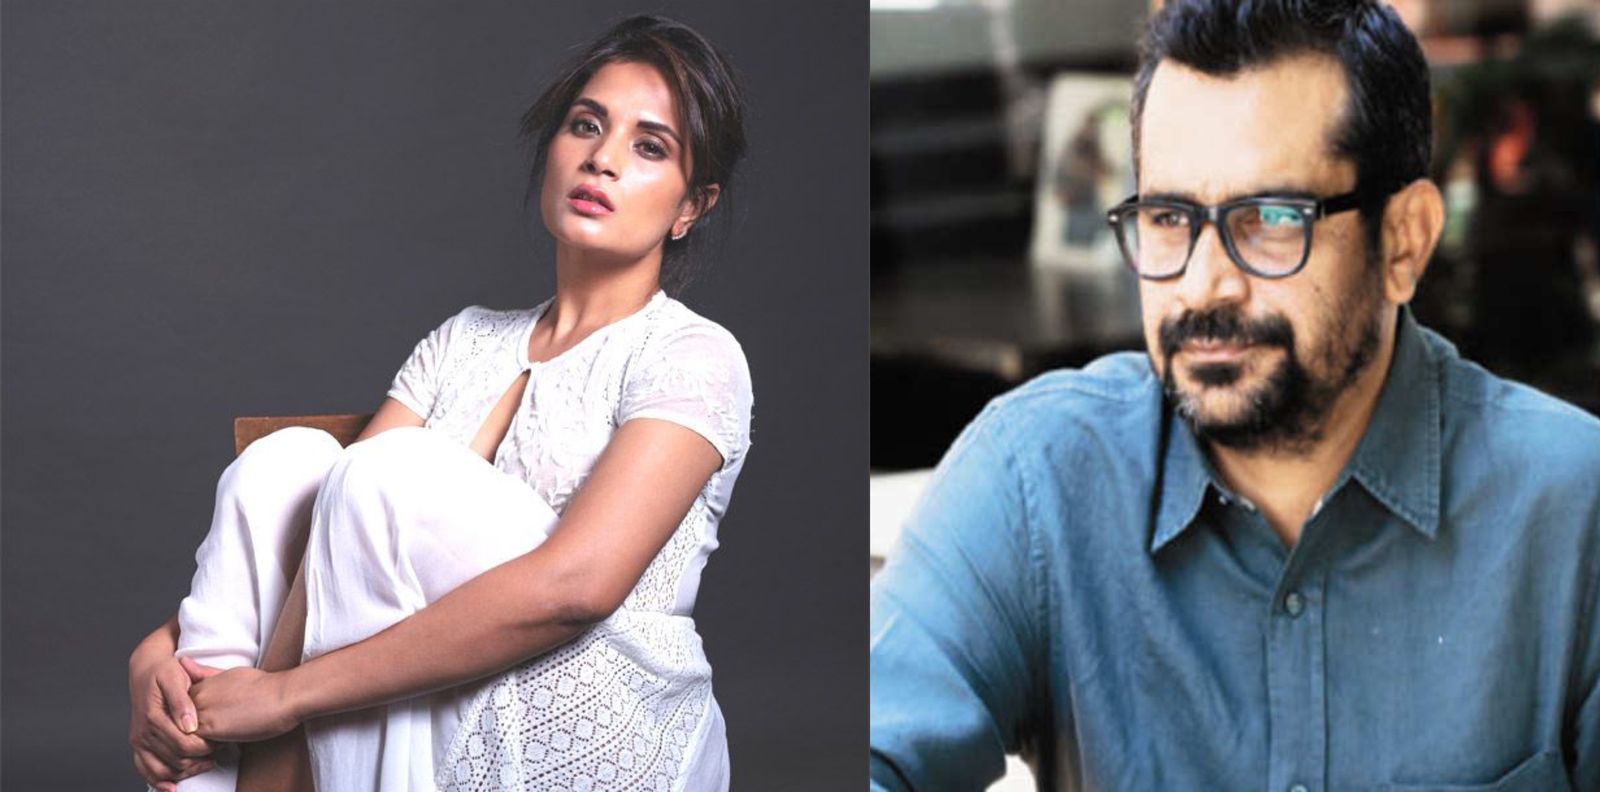 Madam Chief Minister: Richa Chadha Announces Film With Jolly LL.B Director Subhash Kapoor, Calls It Her 'Toughest Part Yet'